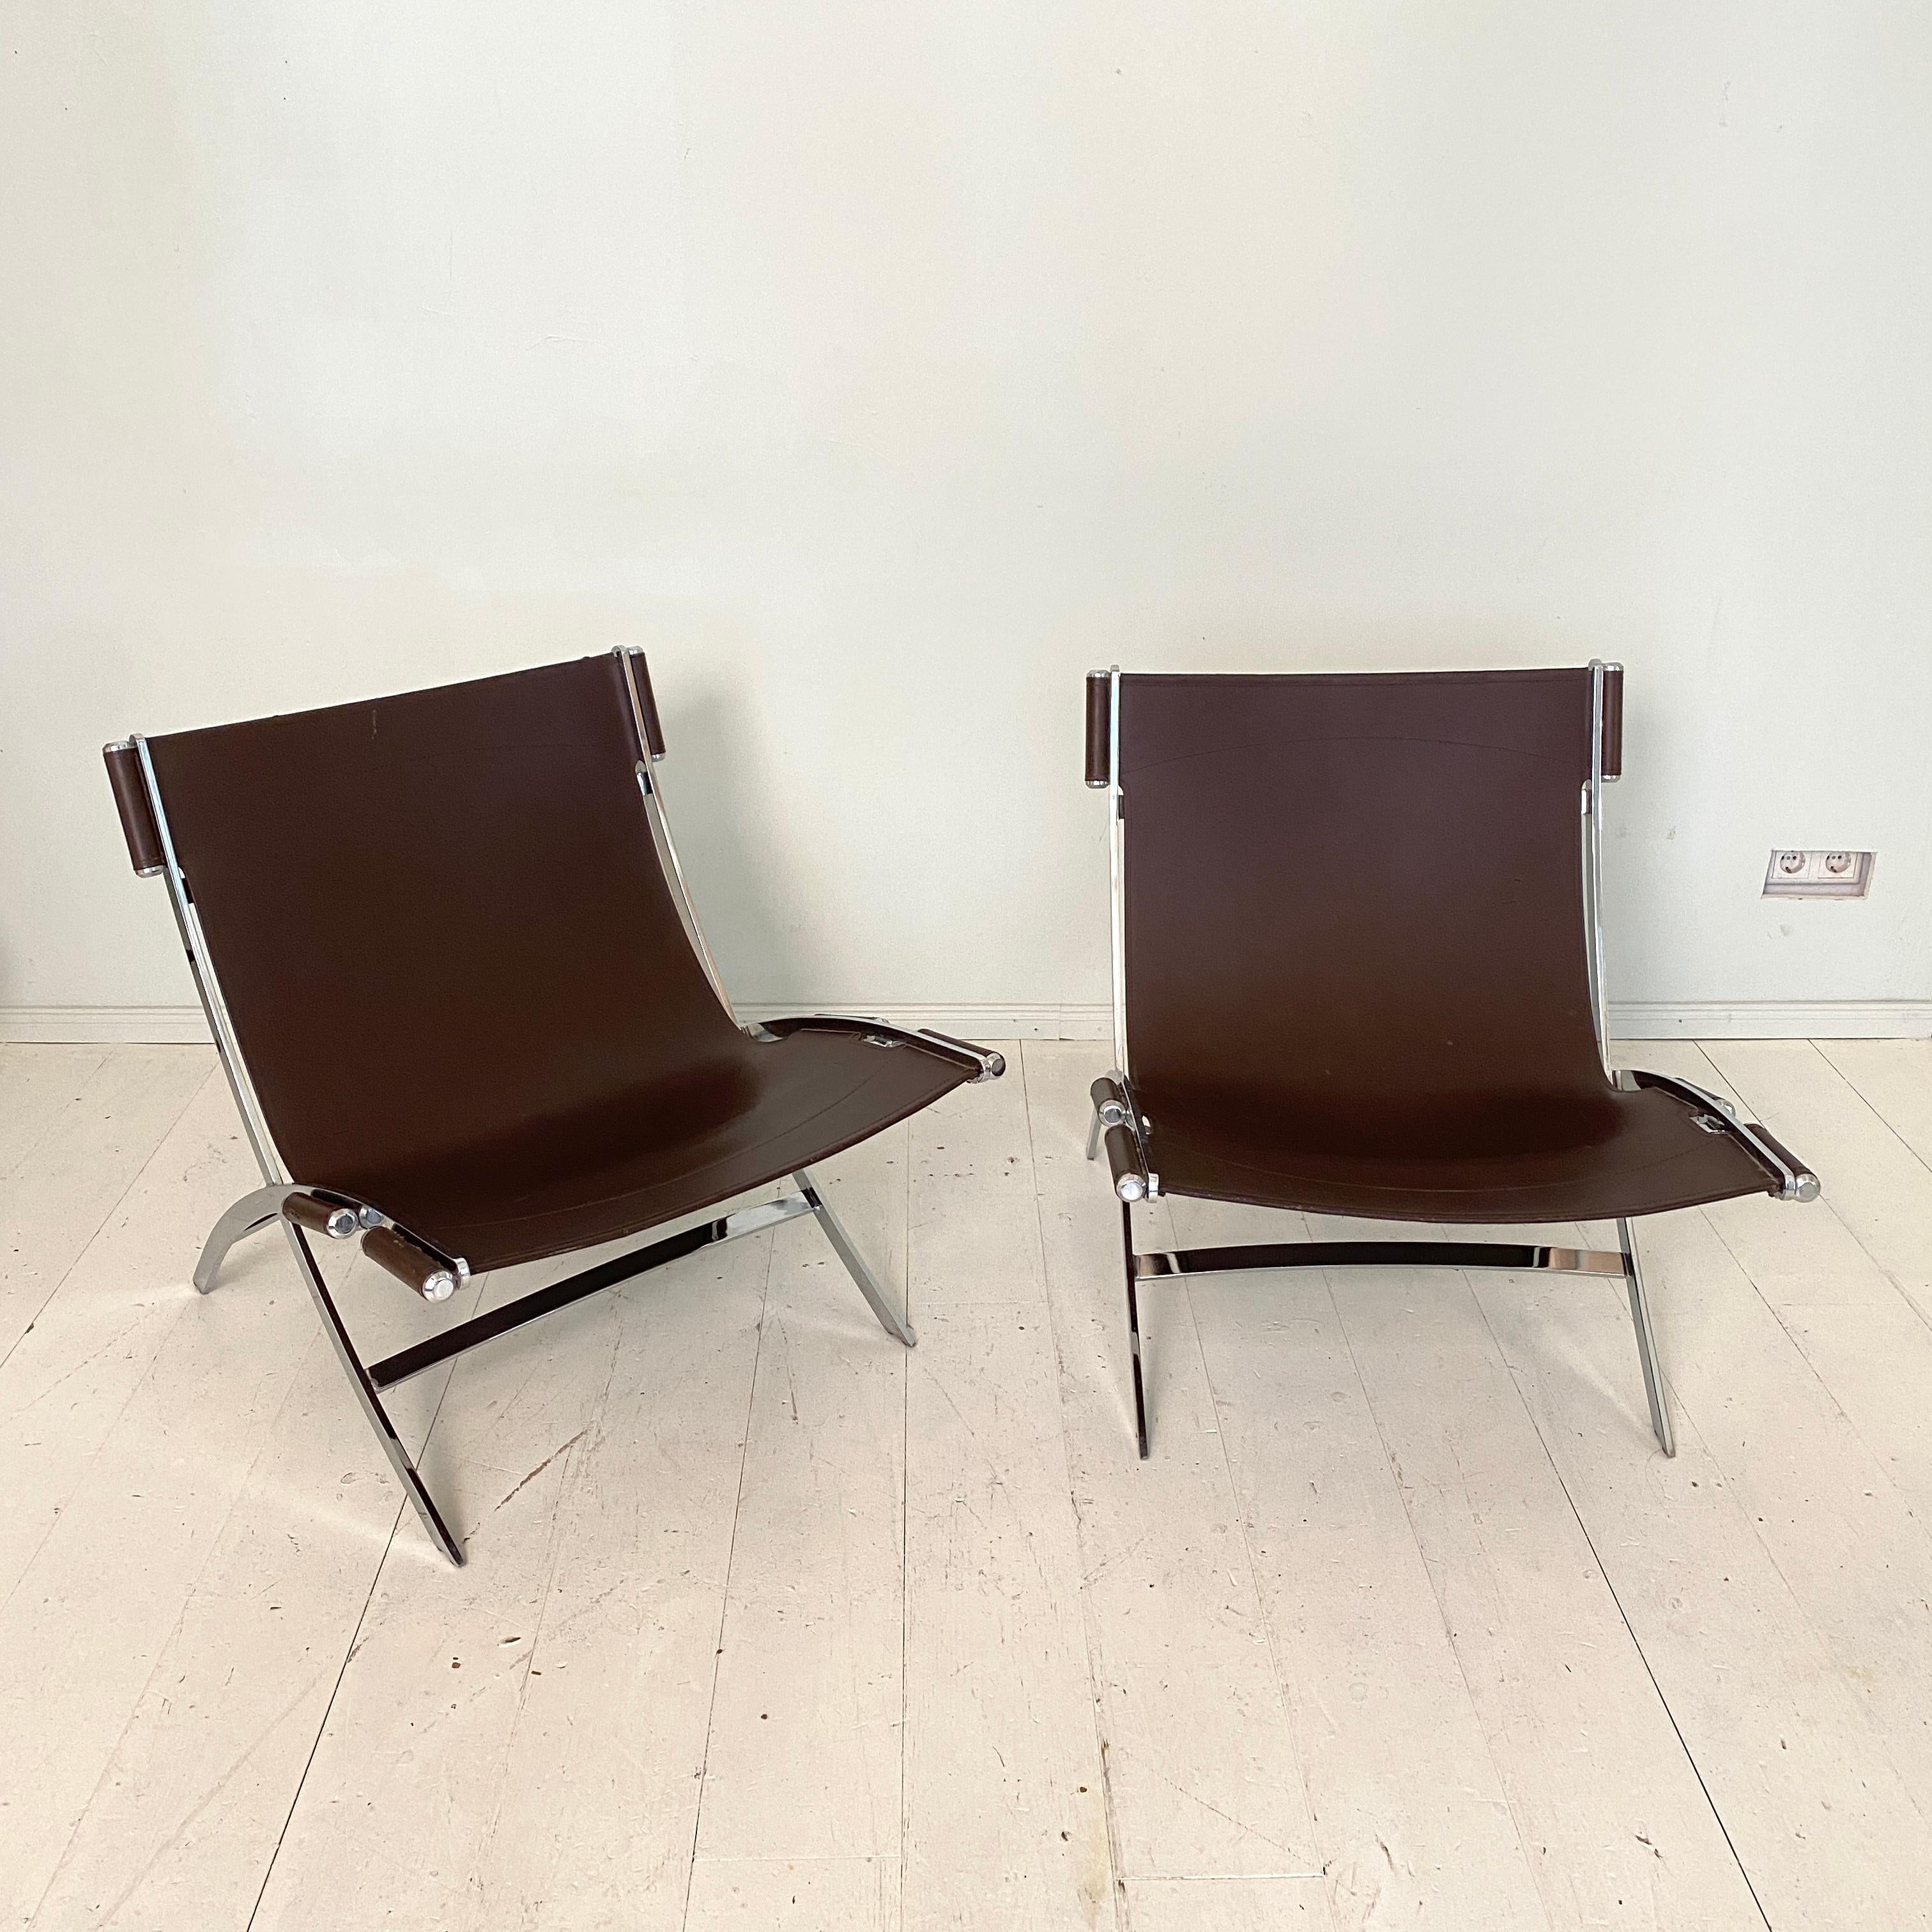 Pair of mid century lounge chairs 'Scissor' by Antonio Citterio in Chrome and Leather for Flexform, made around 1978.
The thick brown leather is neatly stretched within the frame, and held in place by six chrome cylinder shaped capsules.

A